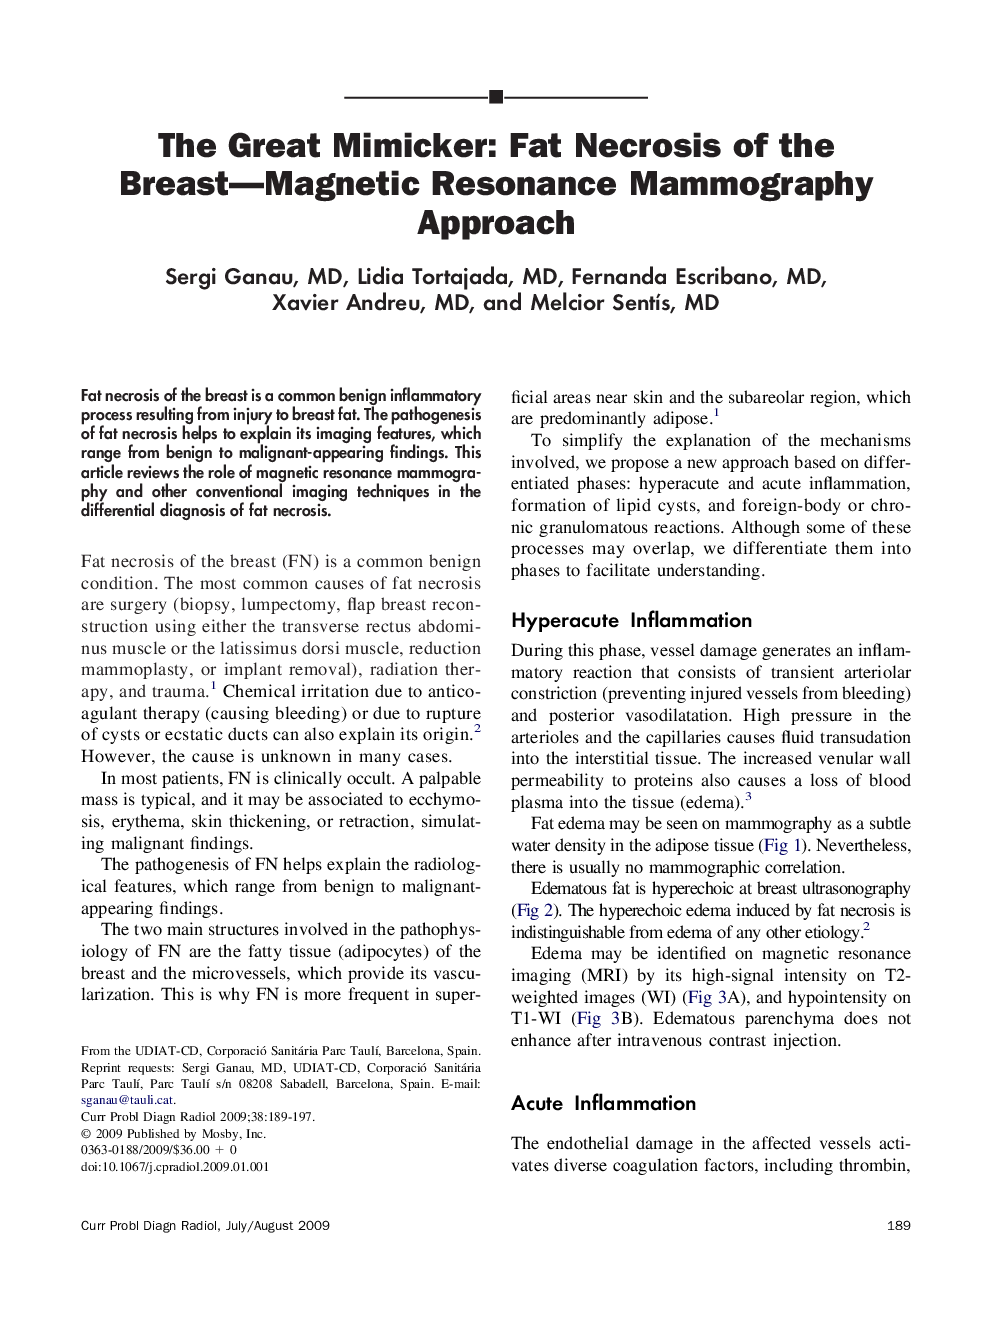 The Great Mimicker: Fat Necrosis of the Breast—Magnetic Resonance Mammography Approach